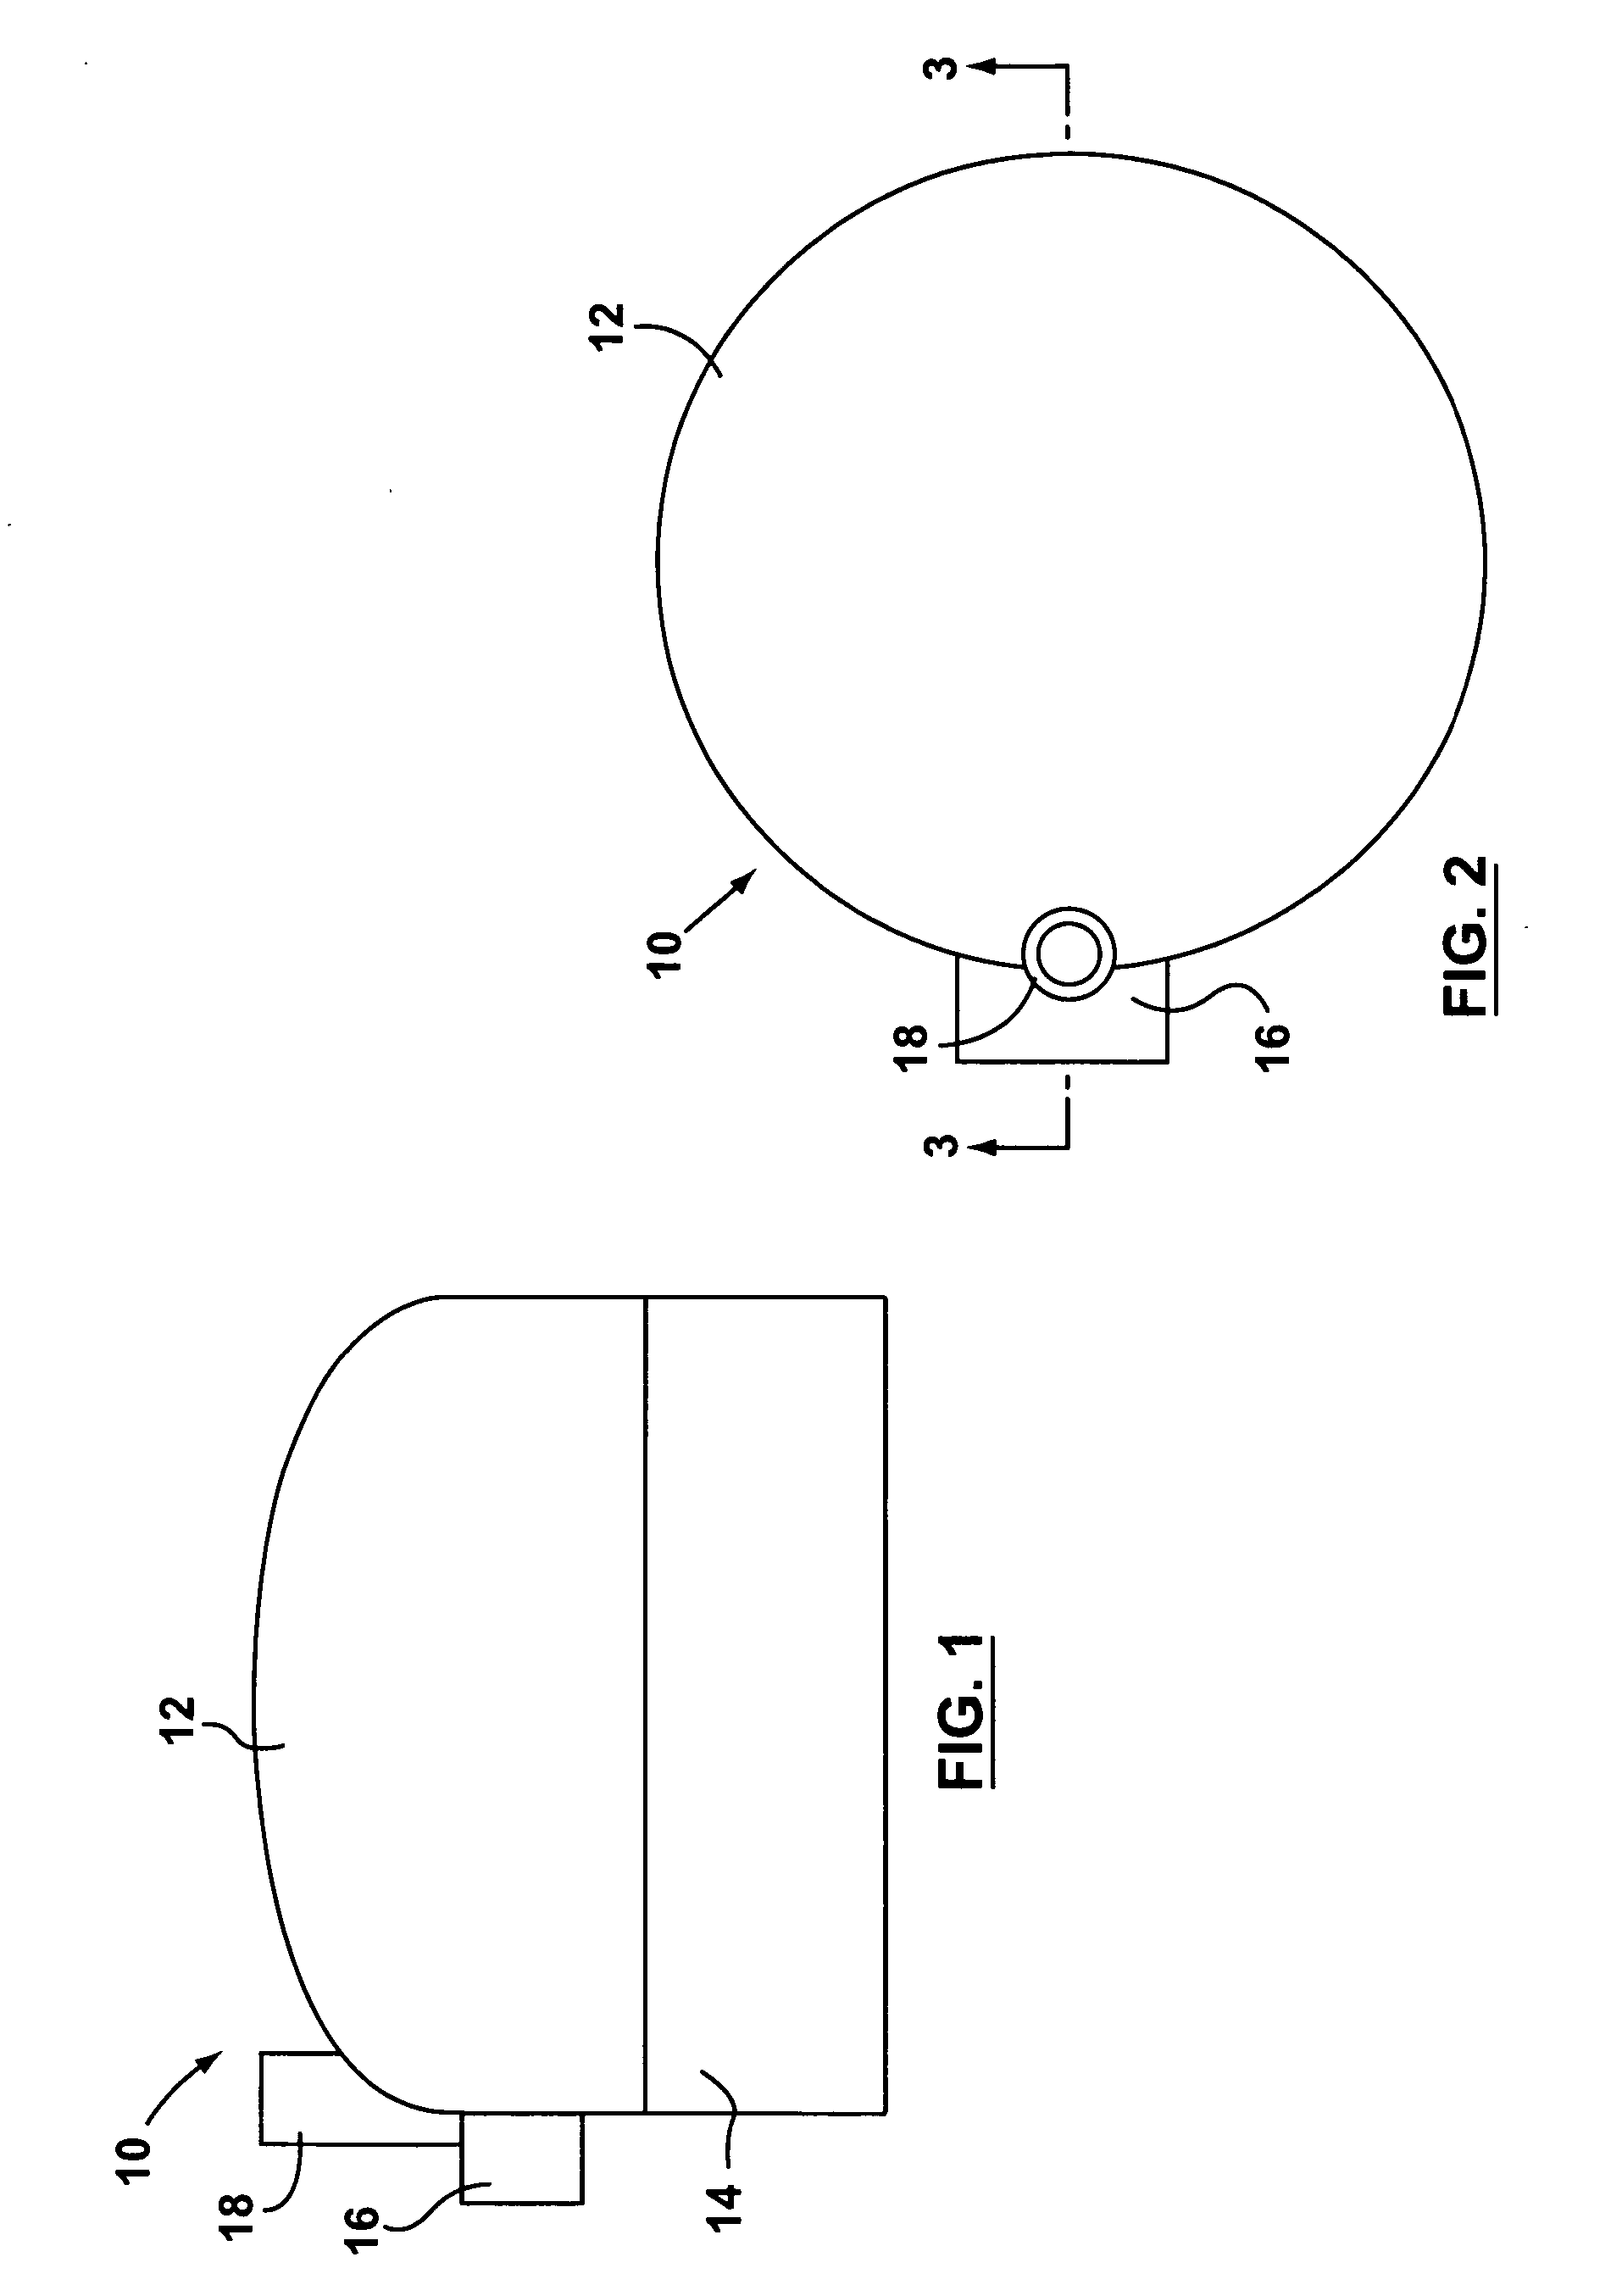 Oven with rotating deck and control system for same